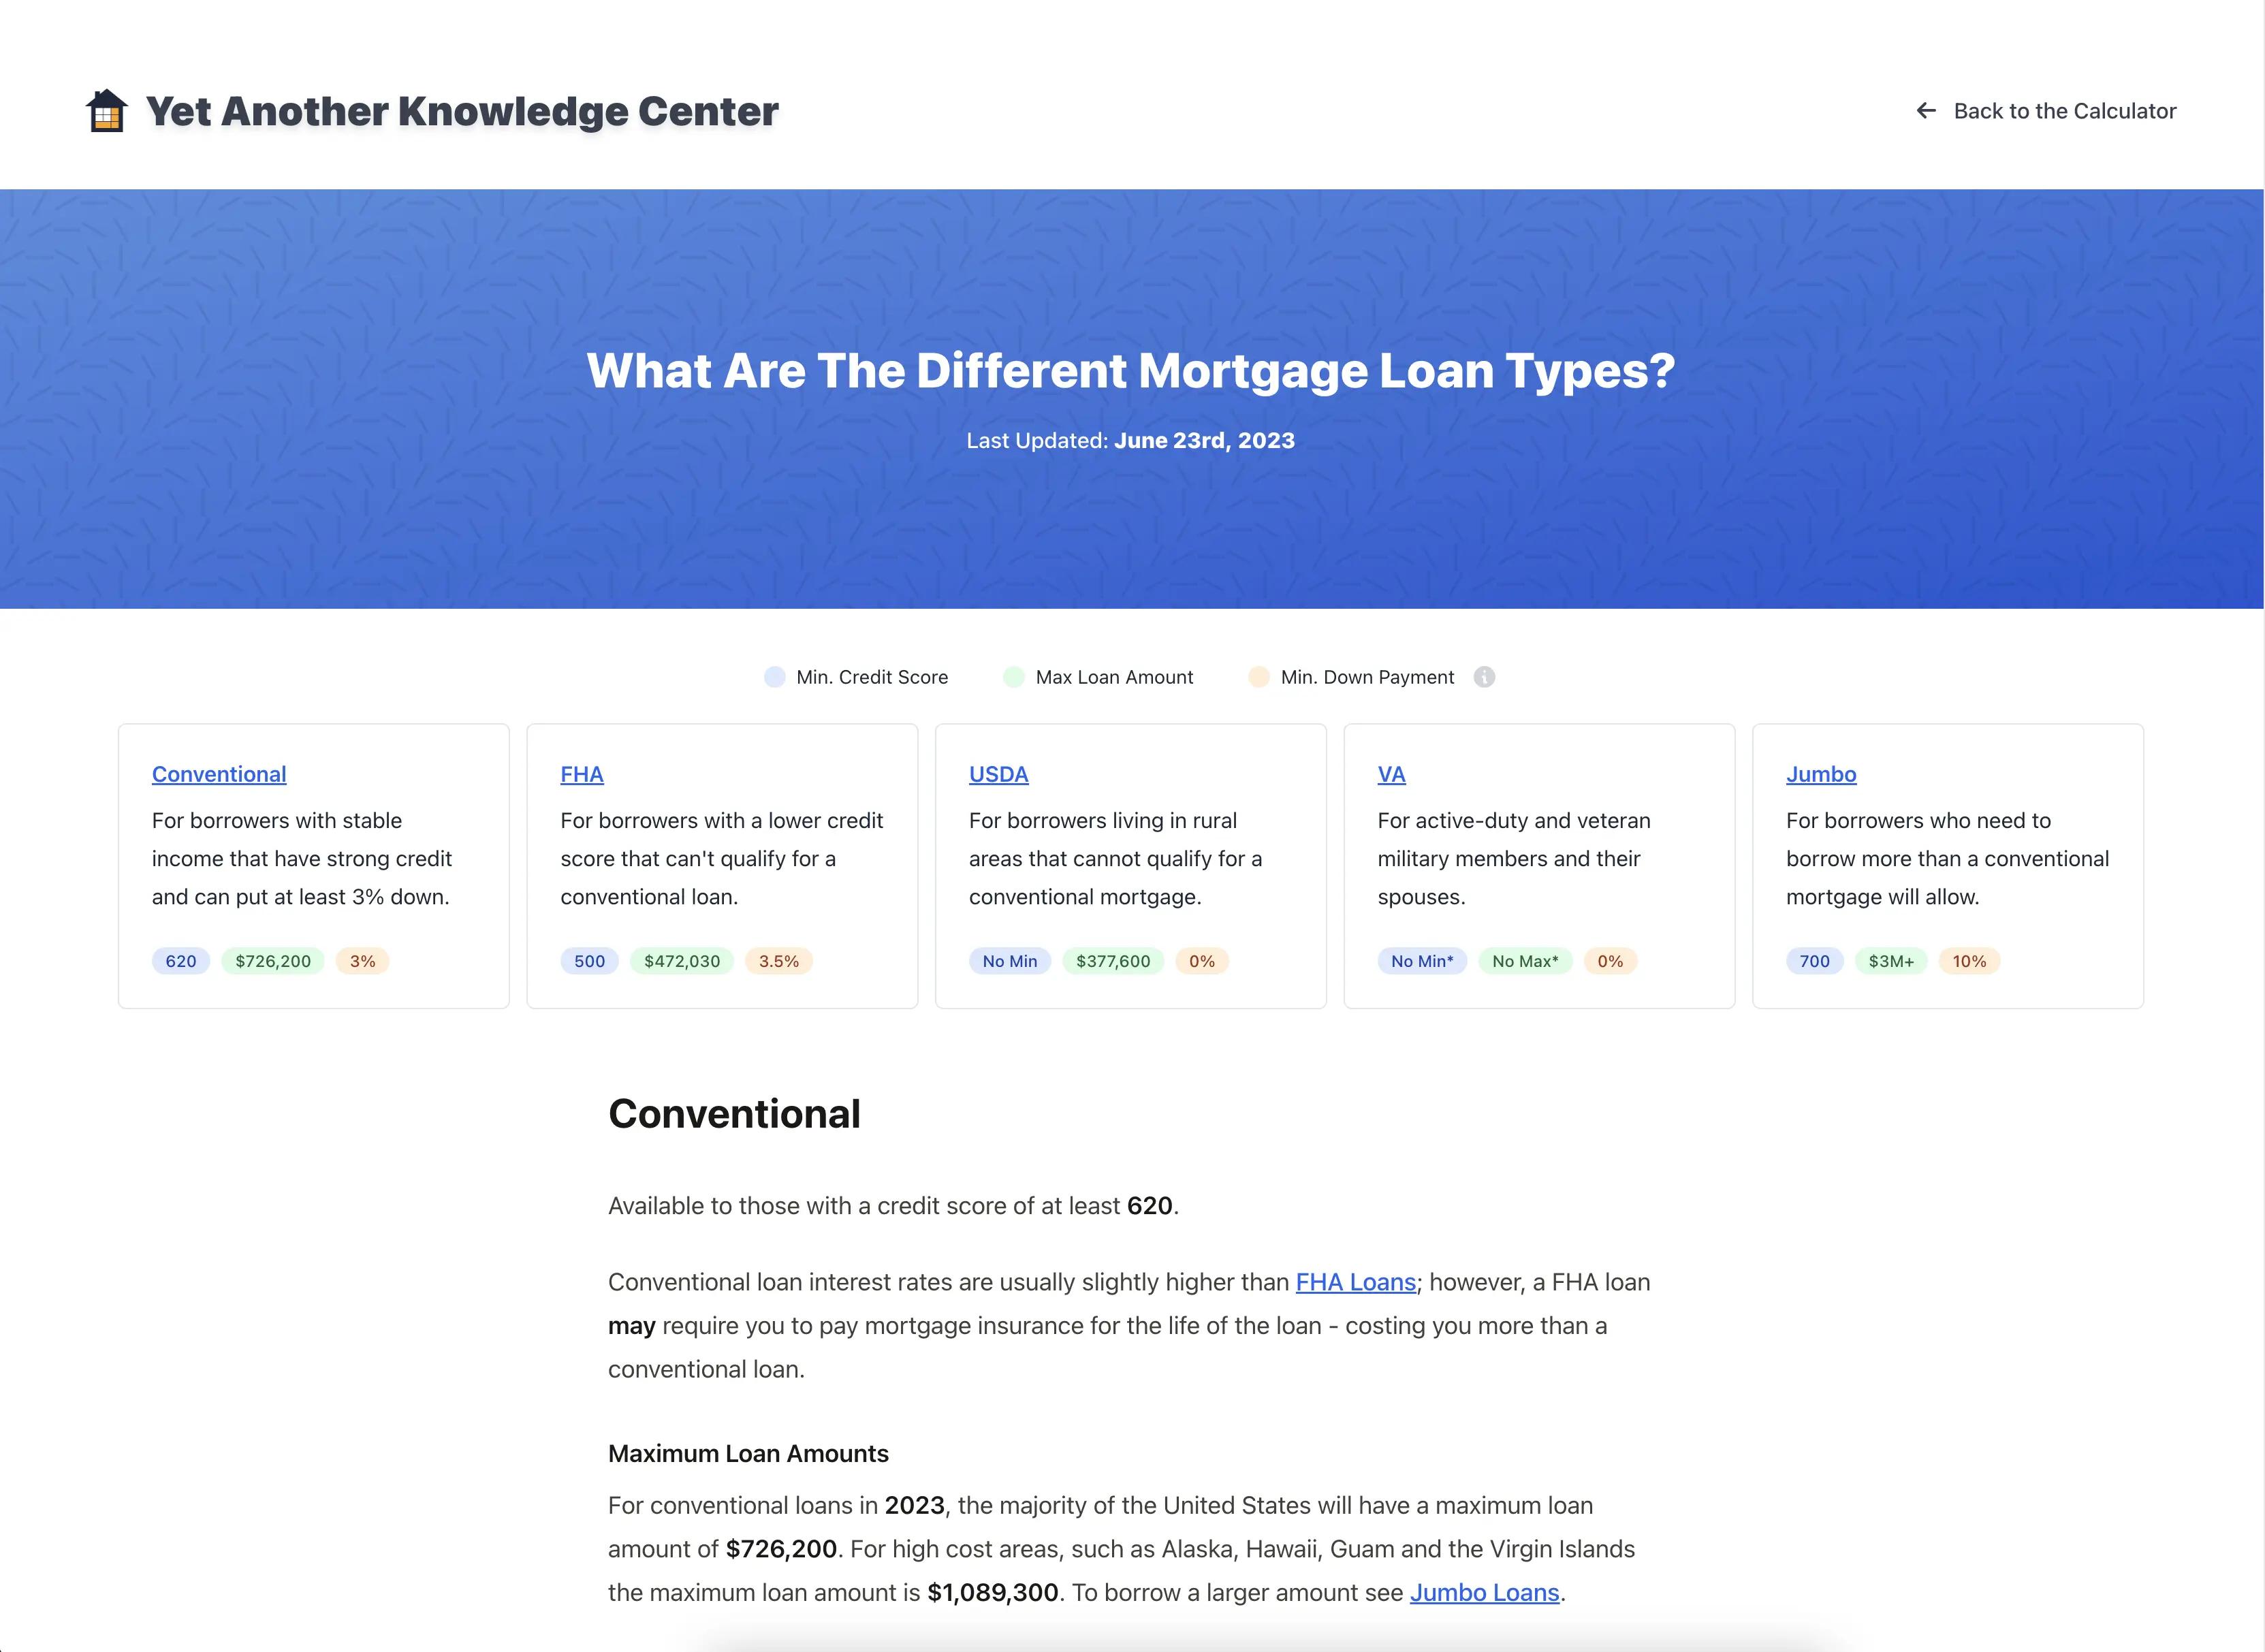 Different Mortgage Loan Types